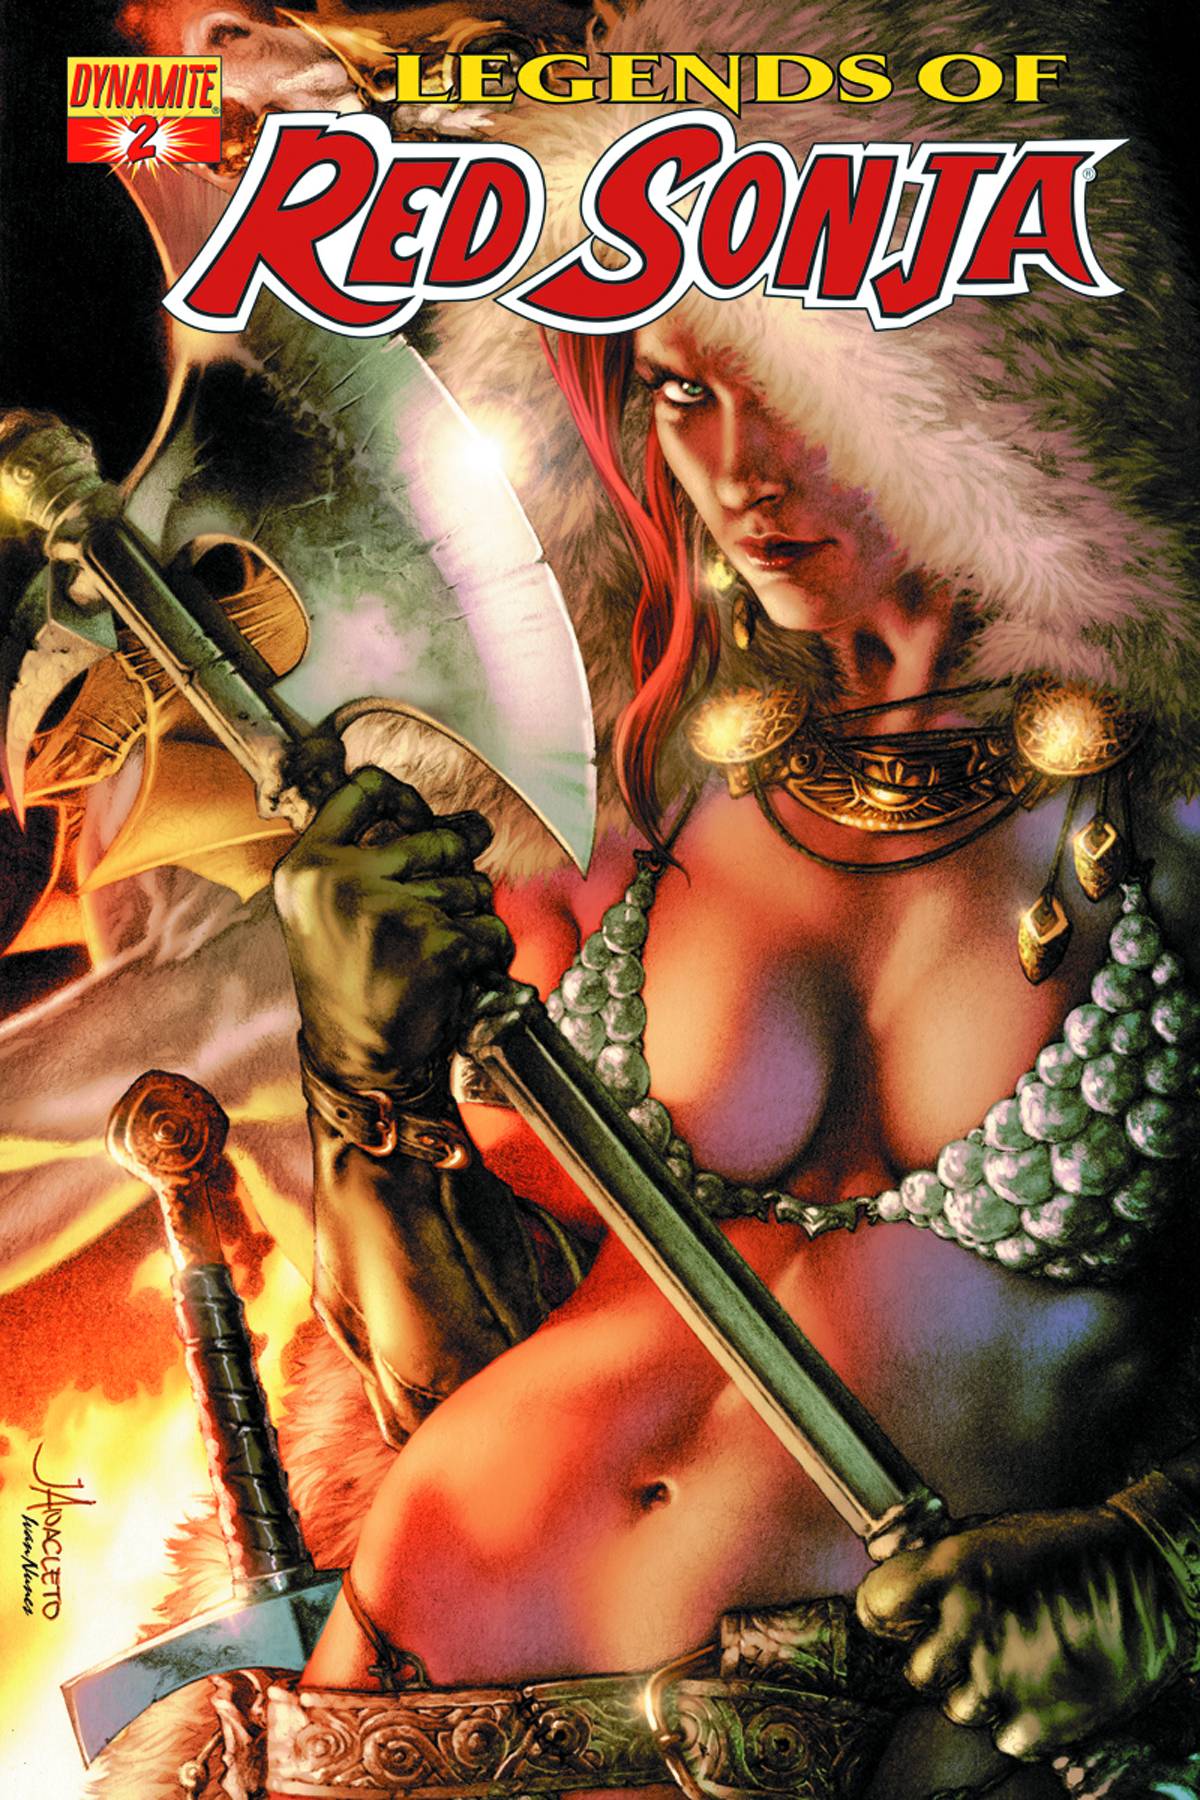 Red Sonja: Unchained #3